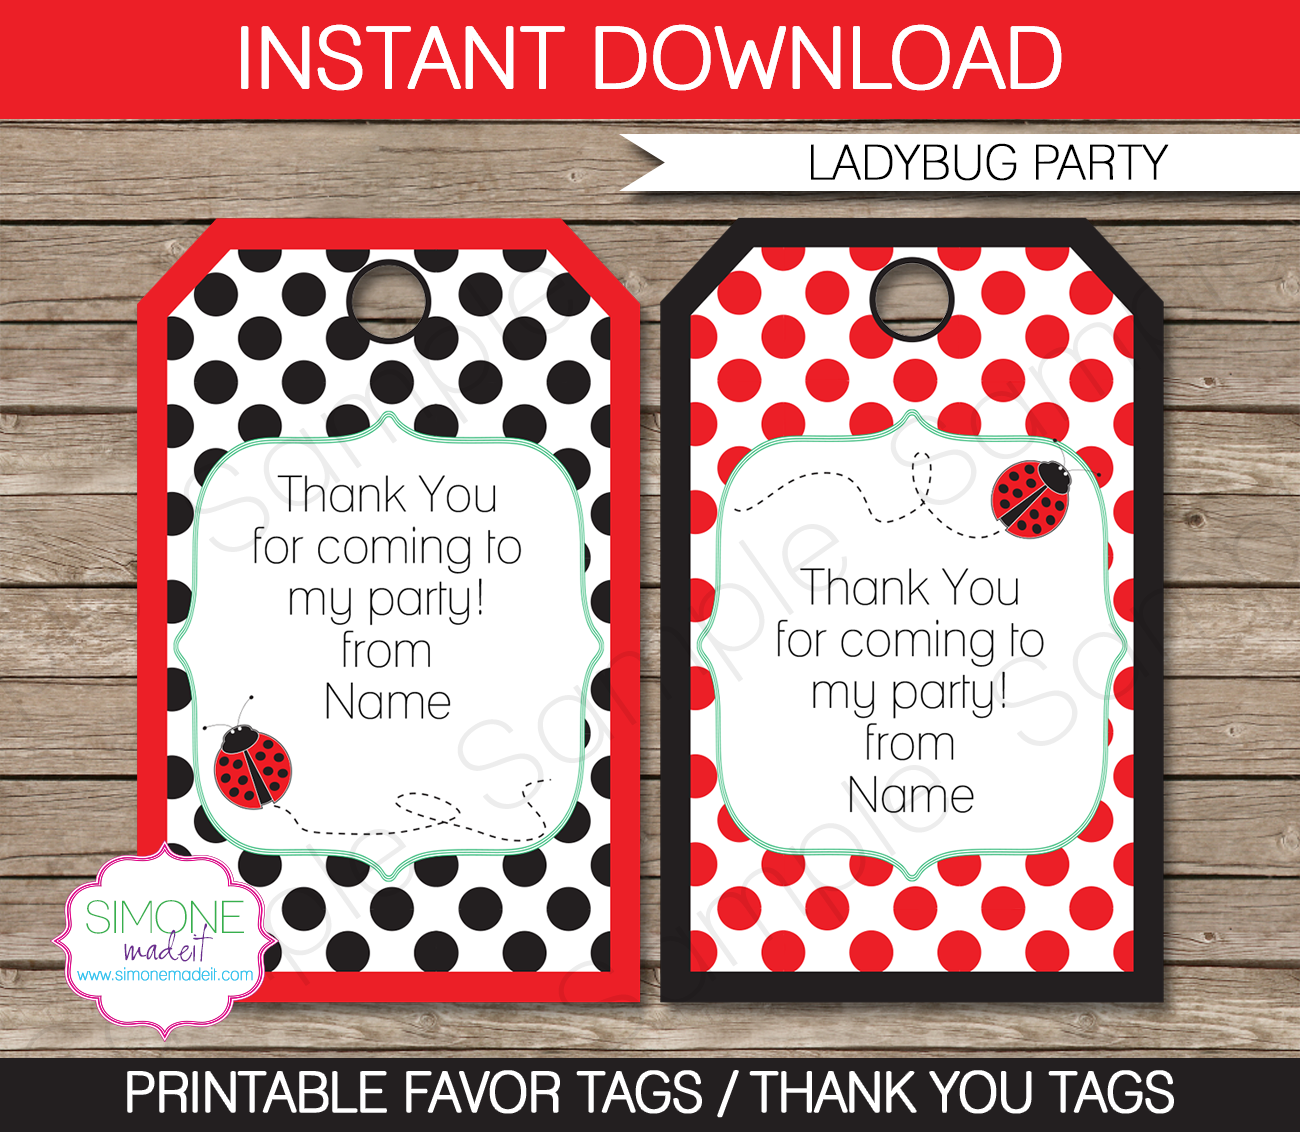 Ladybug Party Favor Tags | Thank You Tags | Birthday Party | Editable DIY Template | $3.00 INSTANT DOWNLOAD via SIMONEmadeit.com